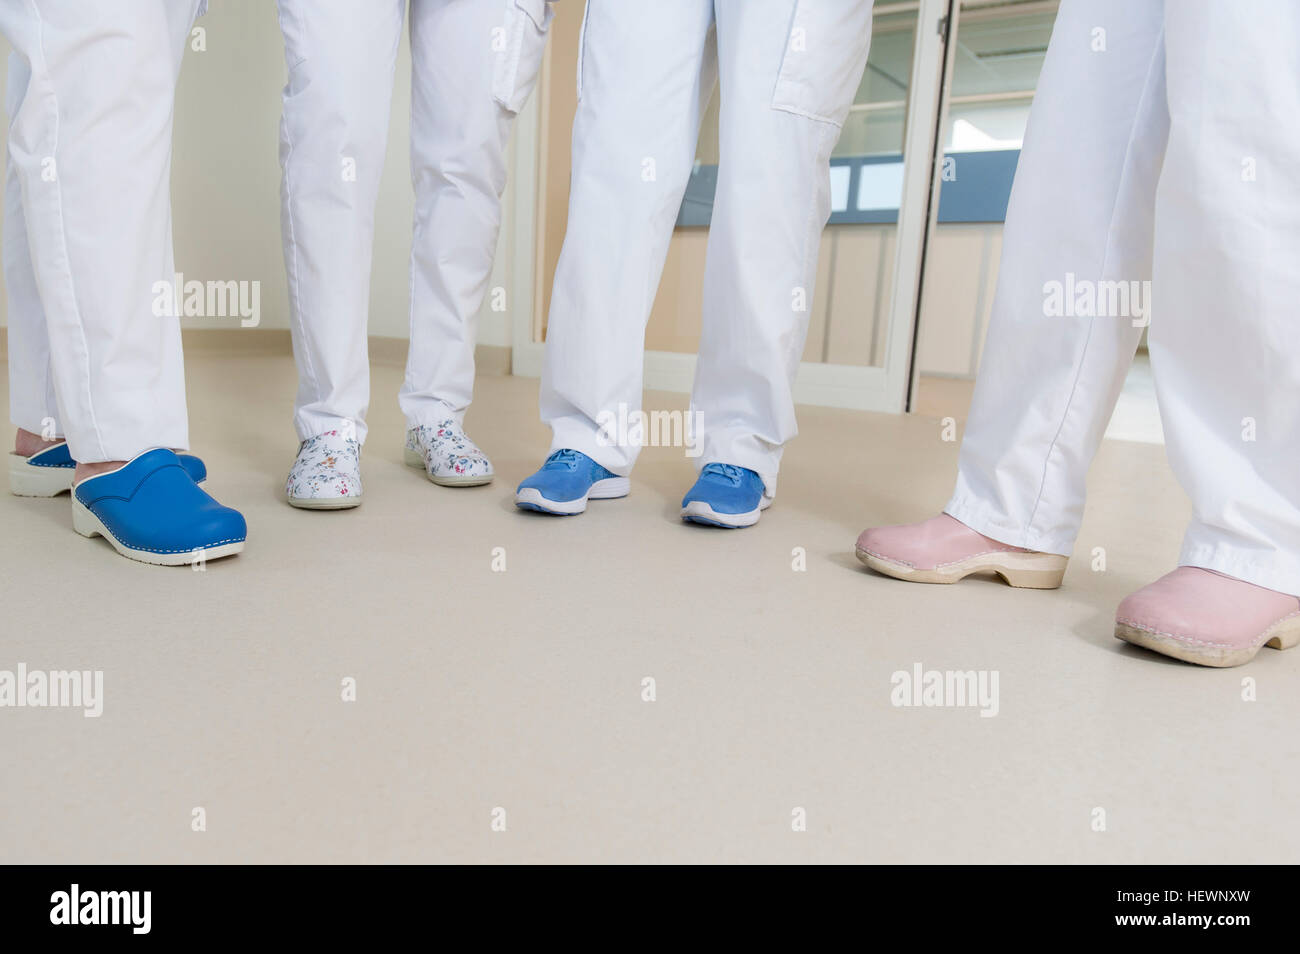 Low section of group of nurses wearing surgical scrubs and clogs Stock Photo